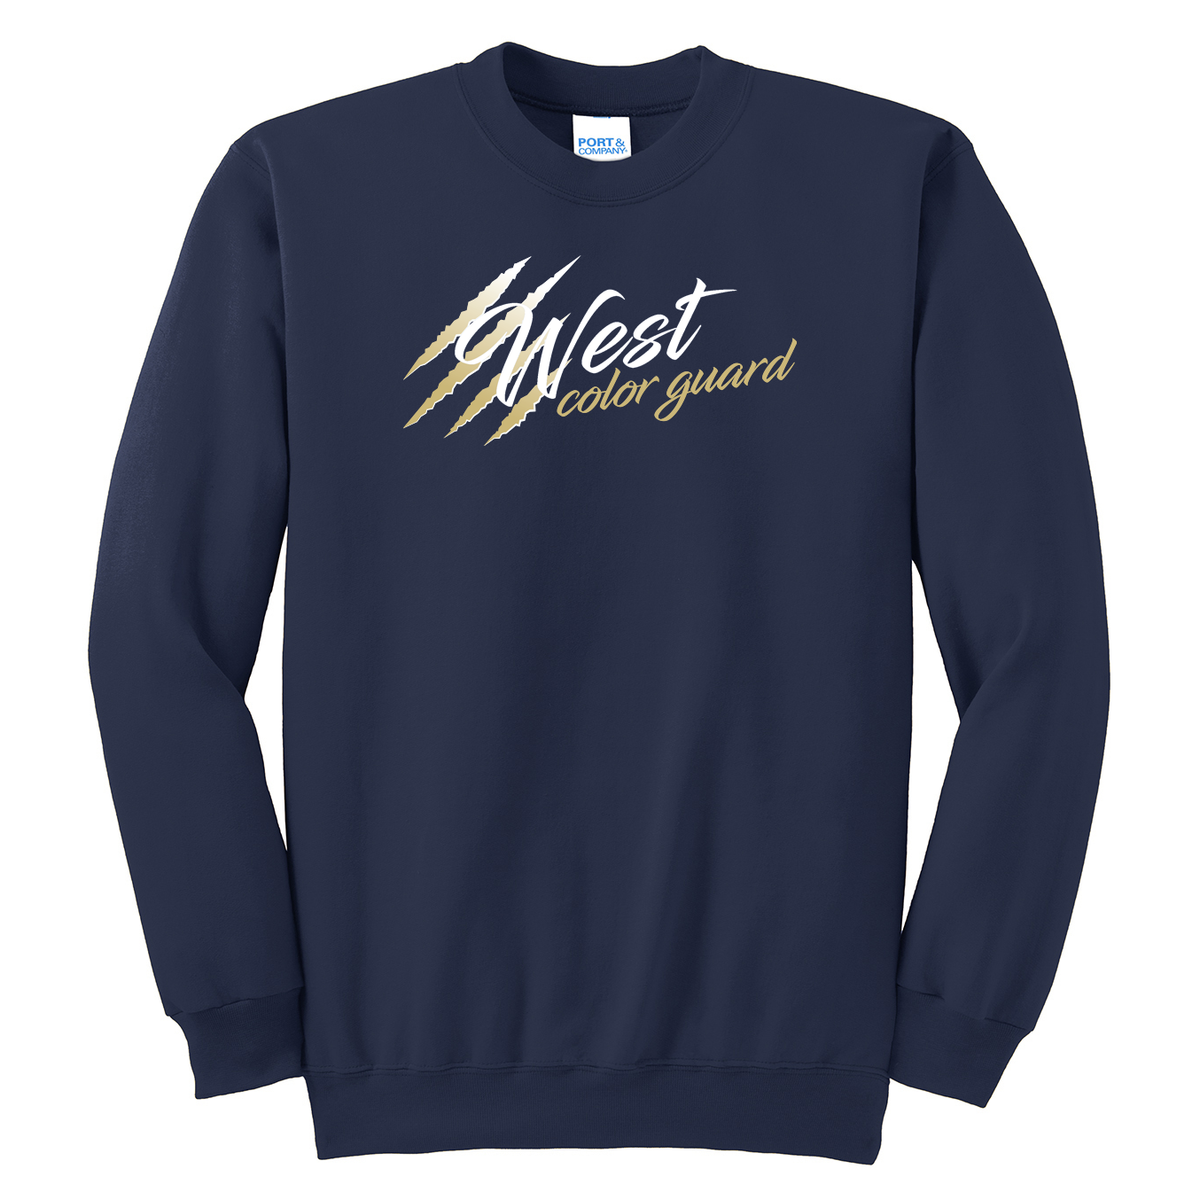 West Forsyth Color Guard Crew Neck Sweater